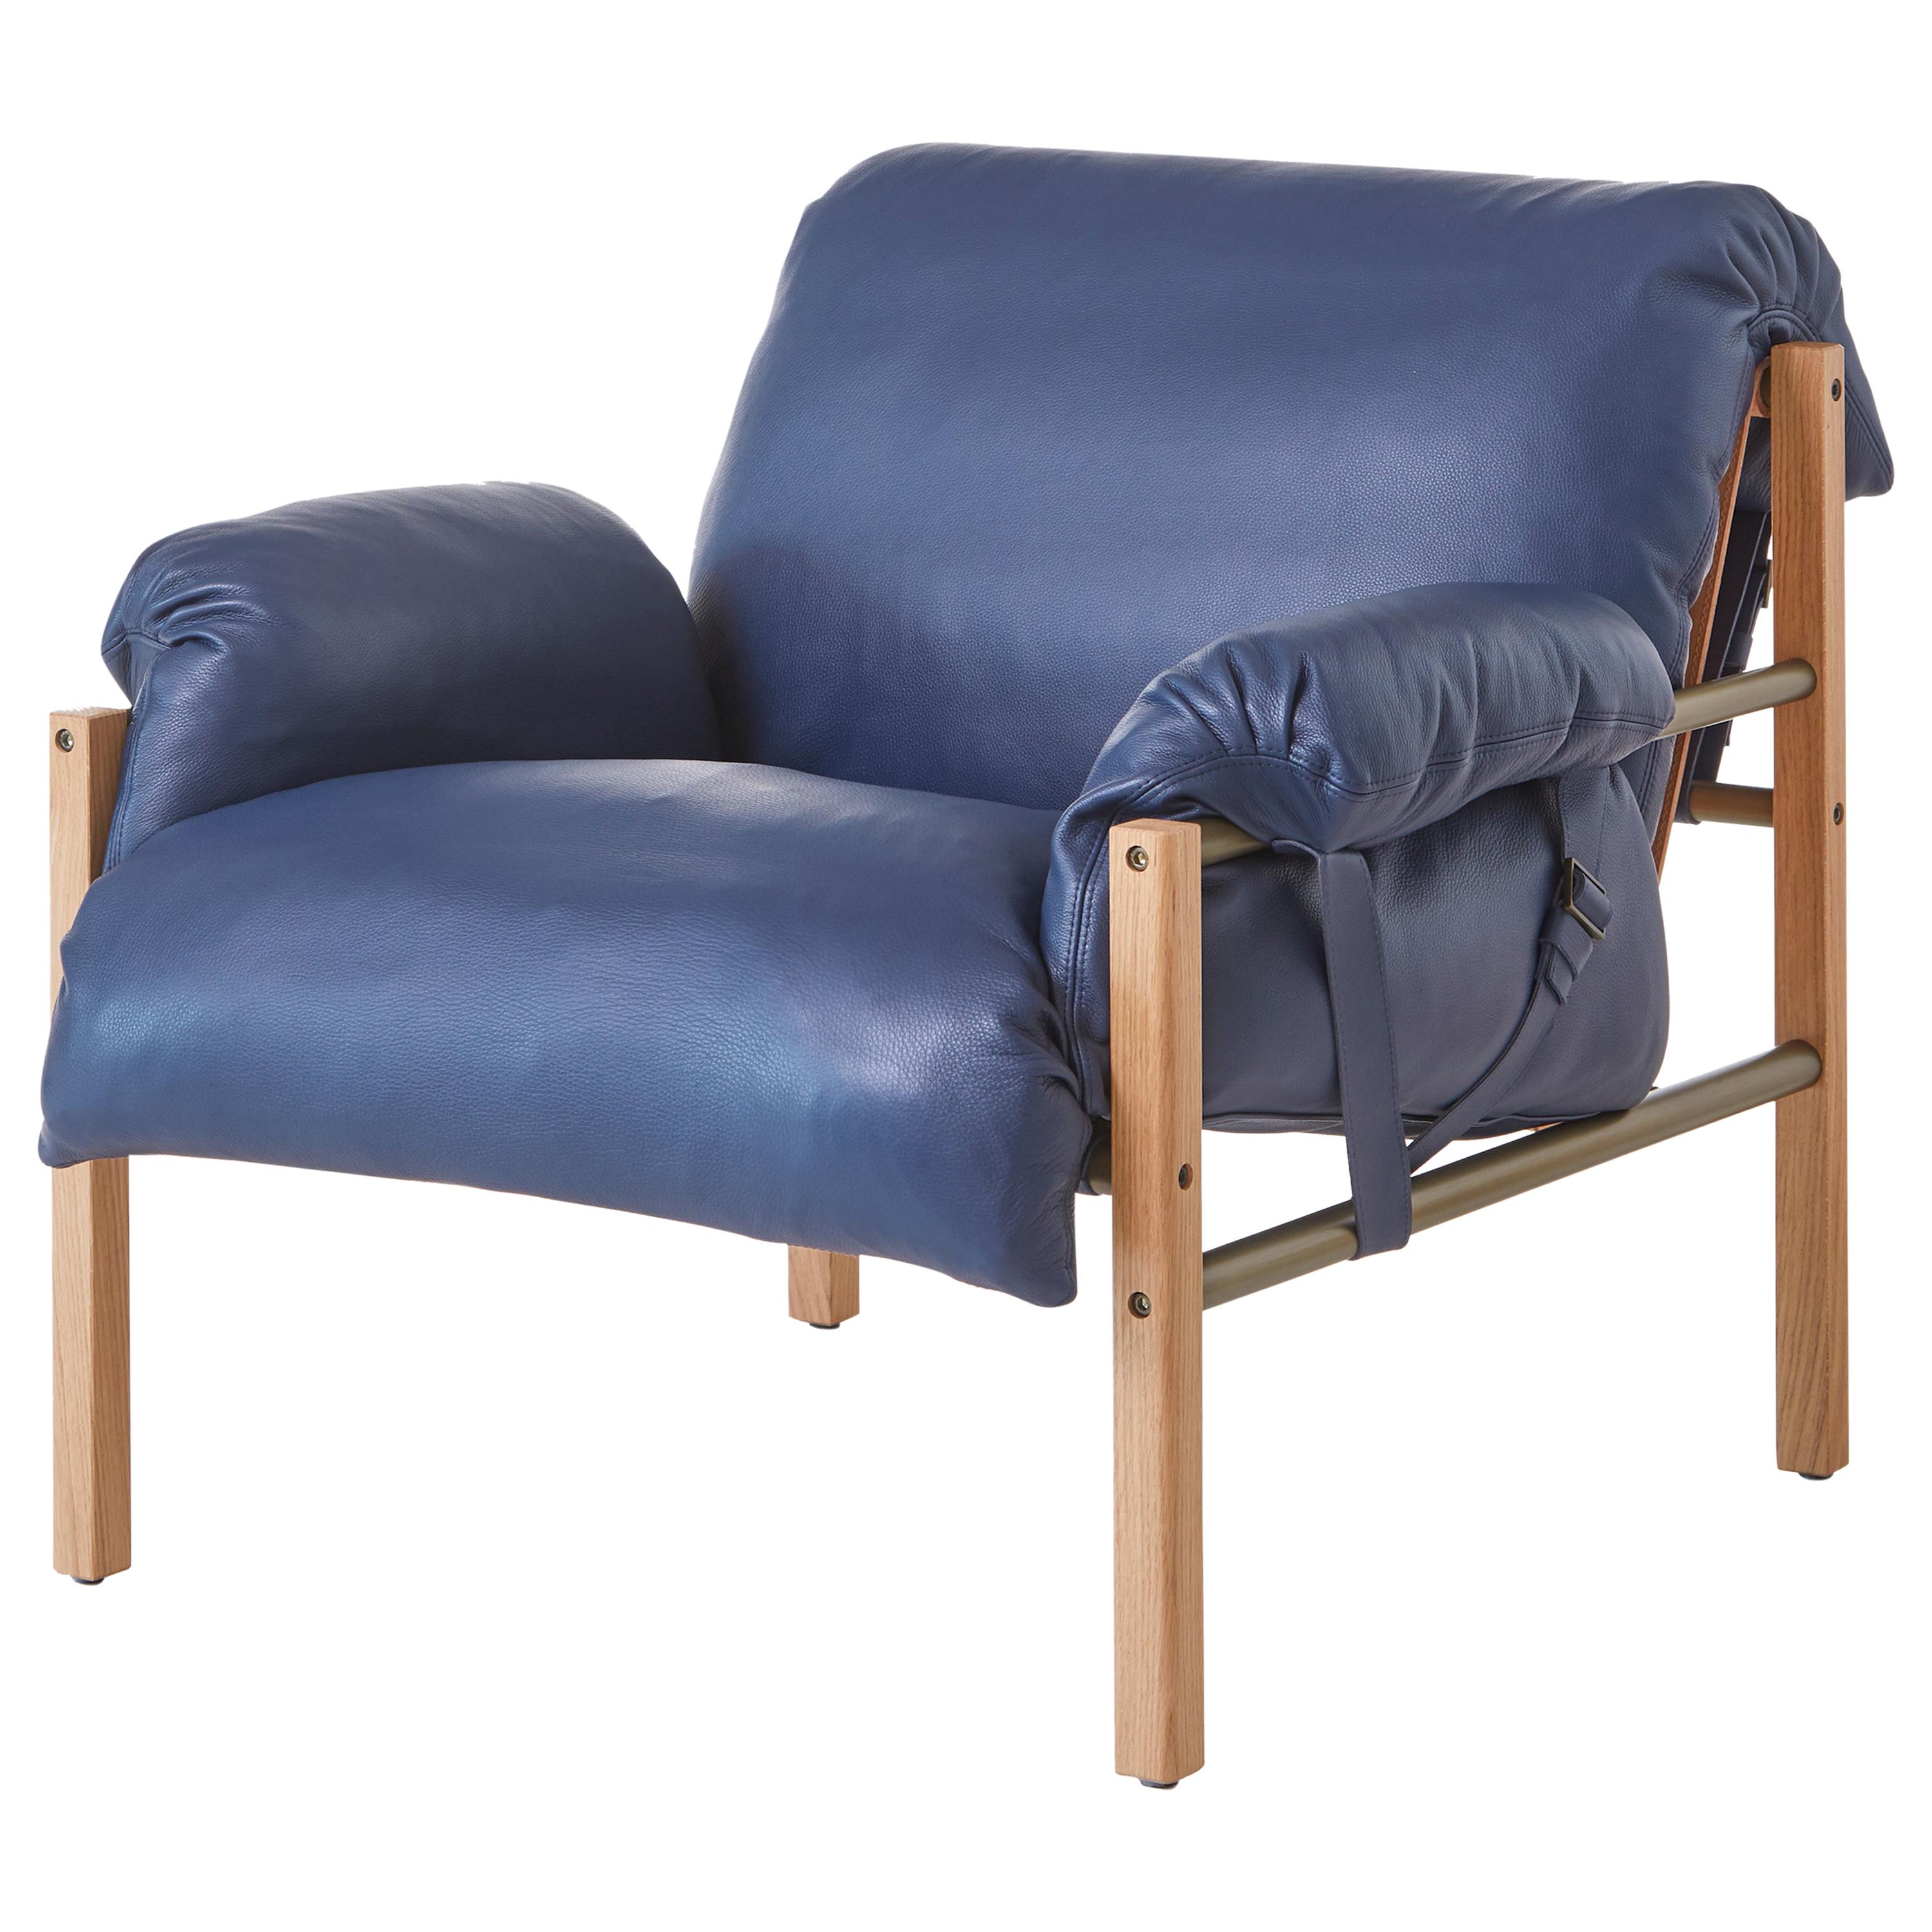 For Sale: Blue (Comfort 97054 Navy) Sling Club Chair in Solid White Oak, Bronze and Leather Designed by Craig Bassam